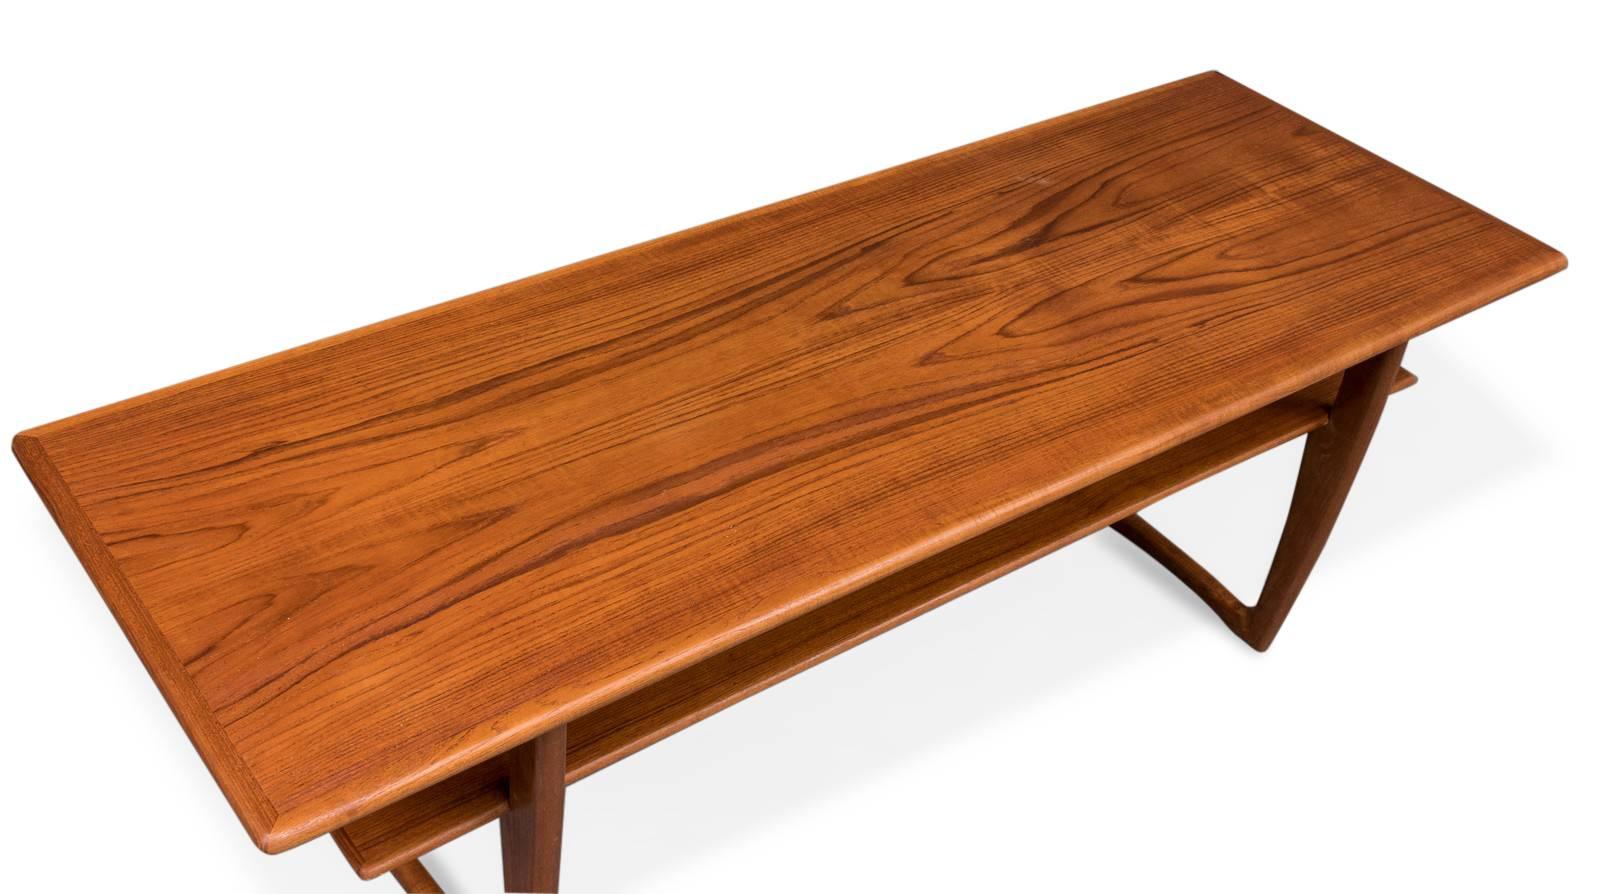 Teak coffee table with rectangular tray, low shelf and V-shaped legs. Danish furniture manufacturer. Produced in 1950s-1960s.
Measures: H. 54 x 151 x 53 cm.